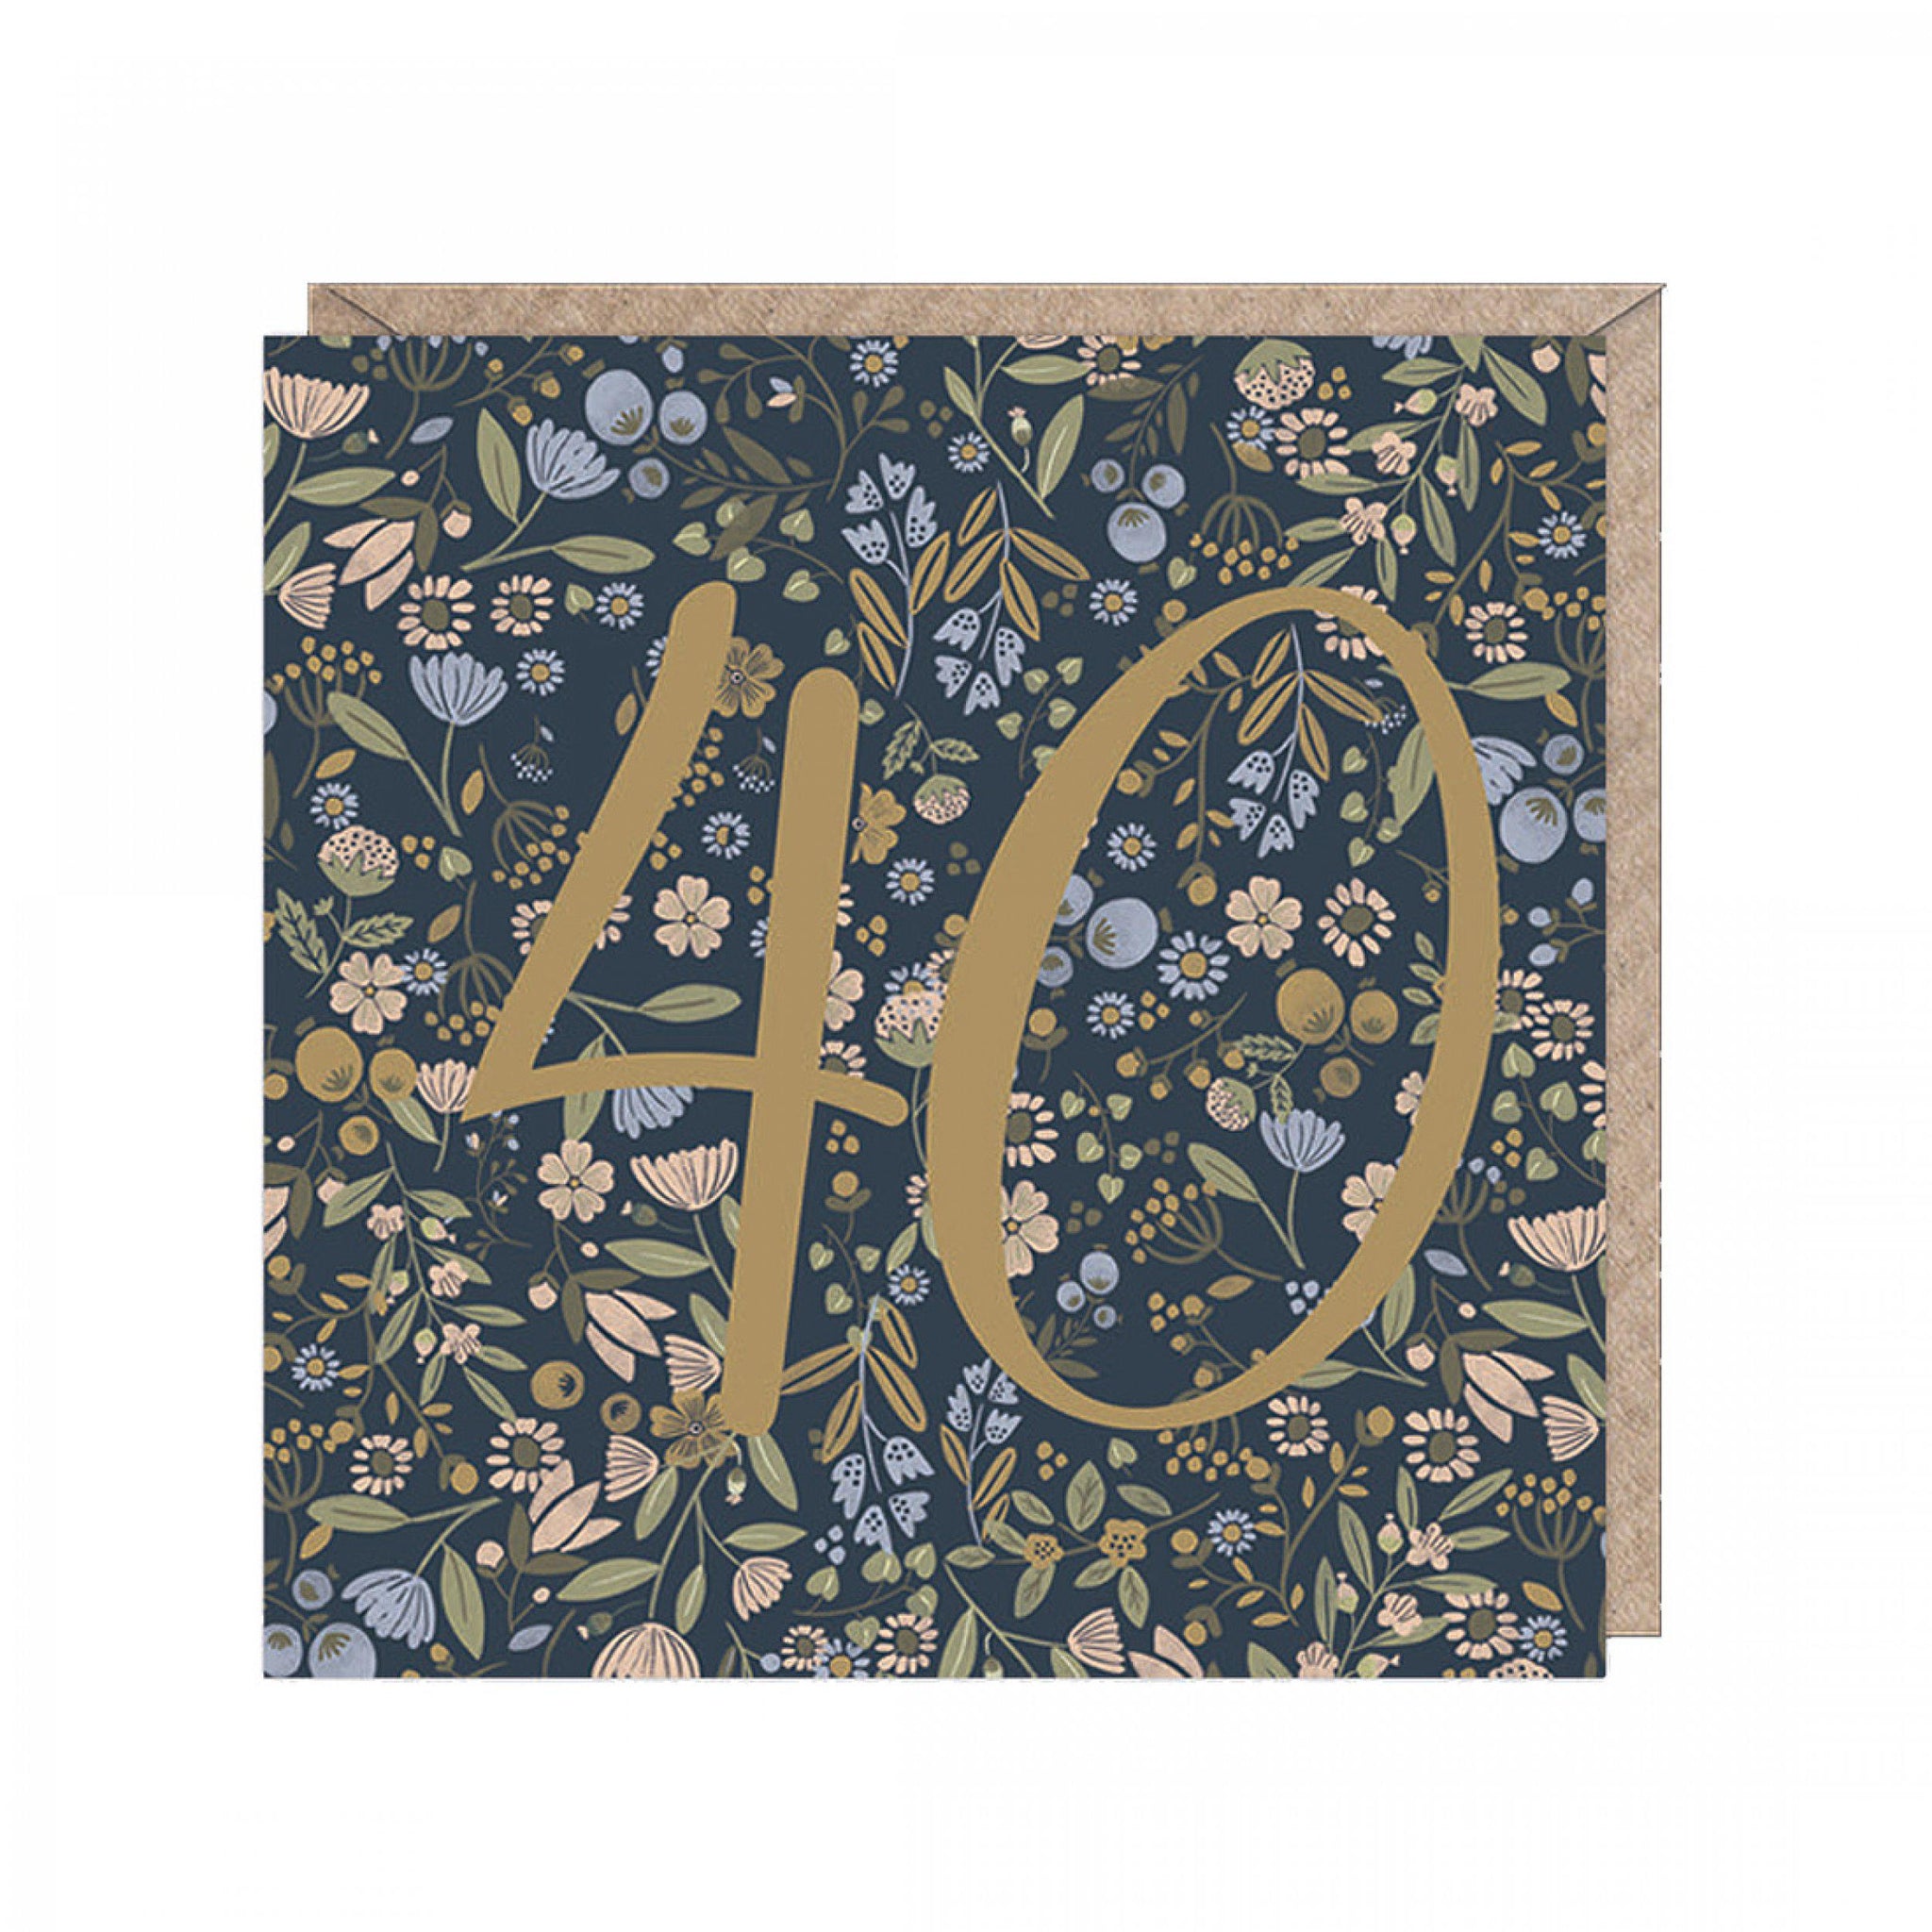 Floral age card - 40 to 90